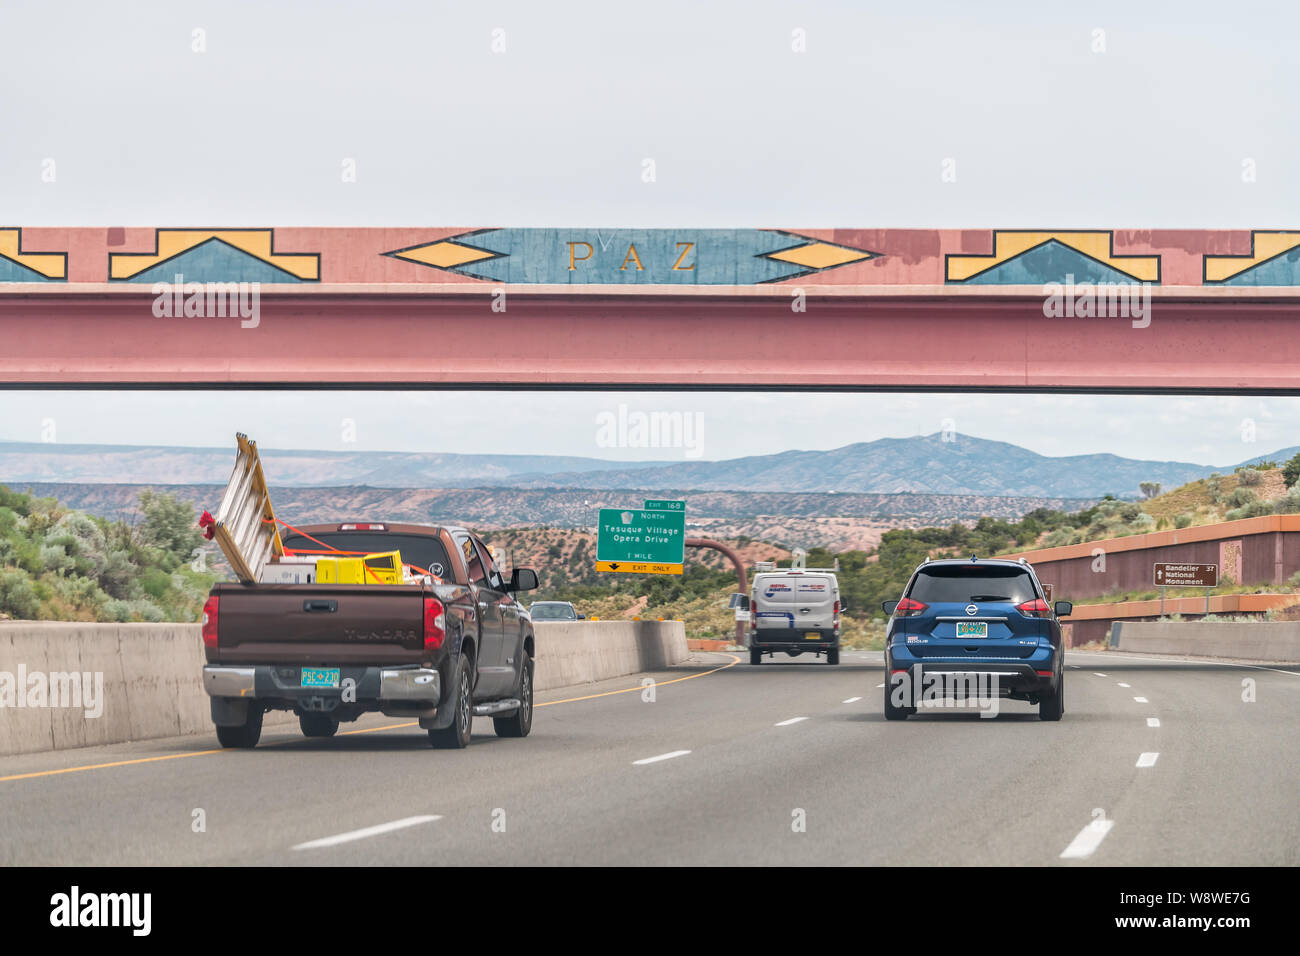 Santa Fe, USA - June 17, 2019: Cars on road US Highway 285 in New Mexico with decorations design colorful artwork on walls Stock Photo